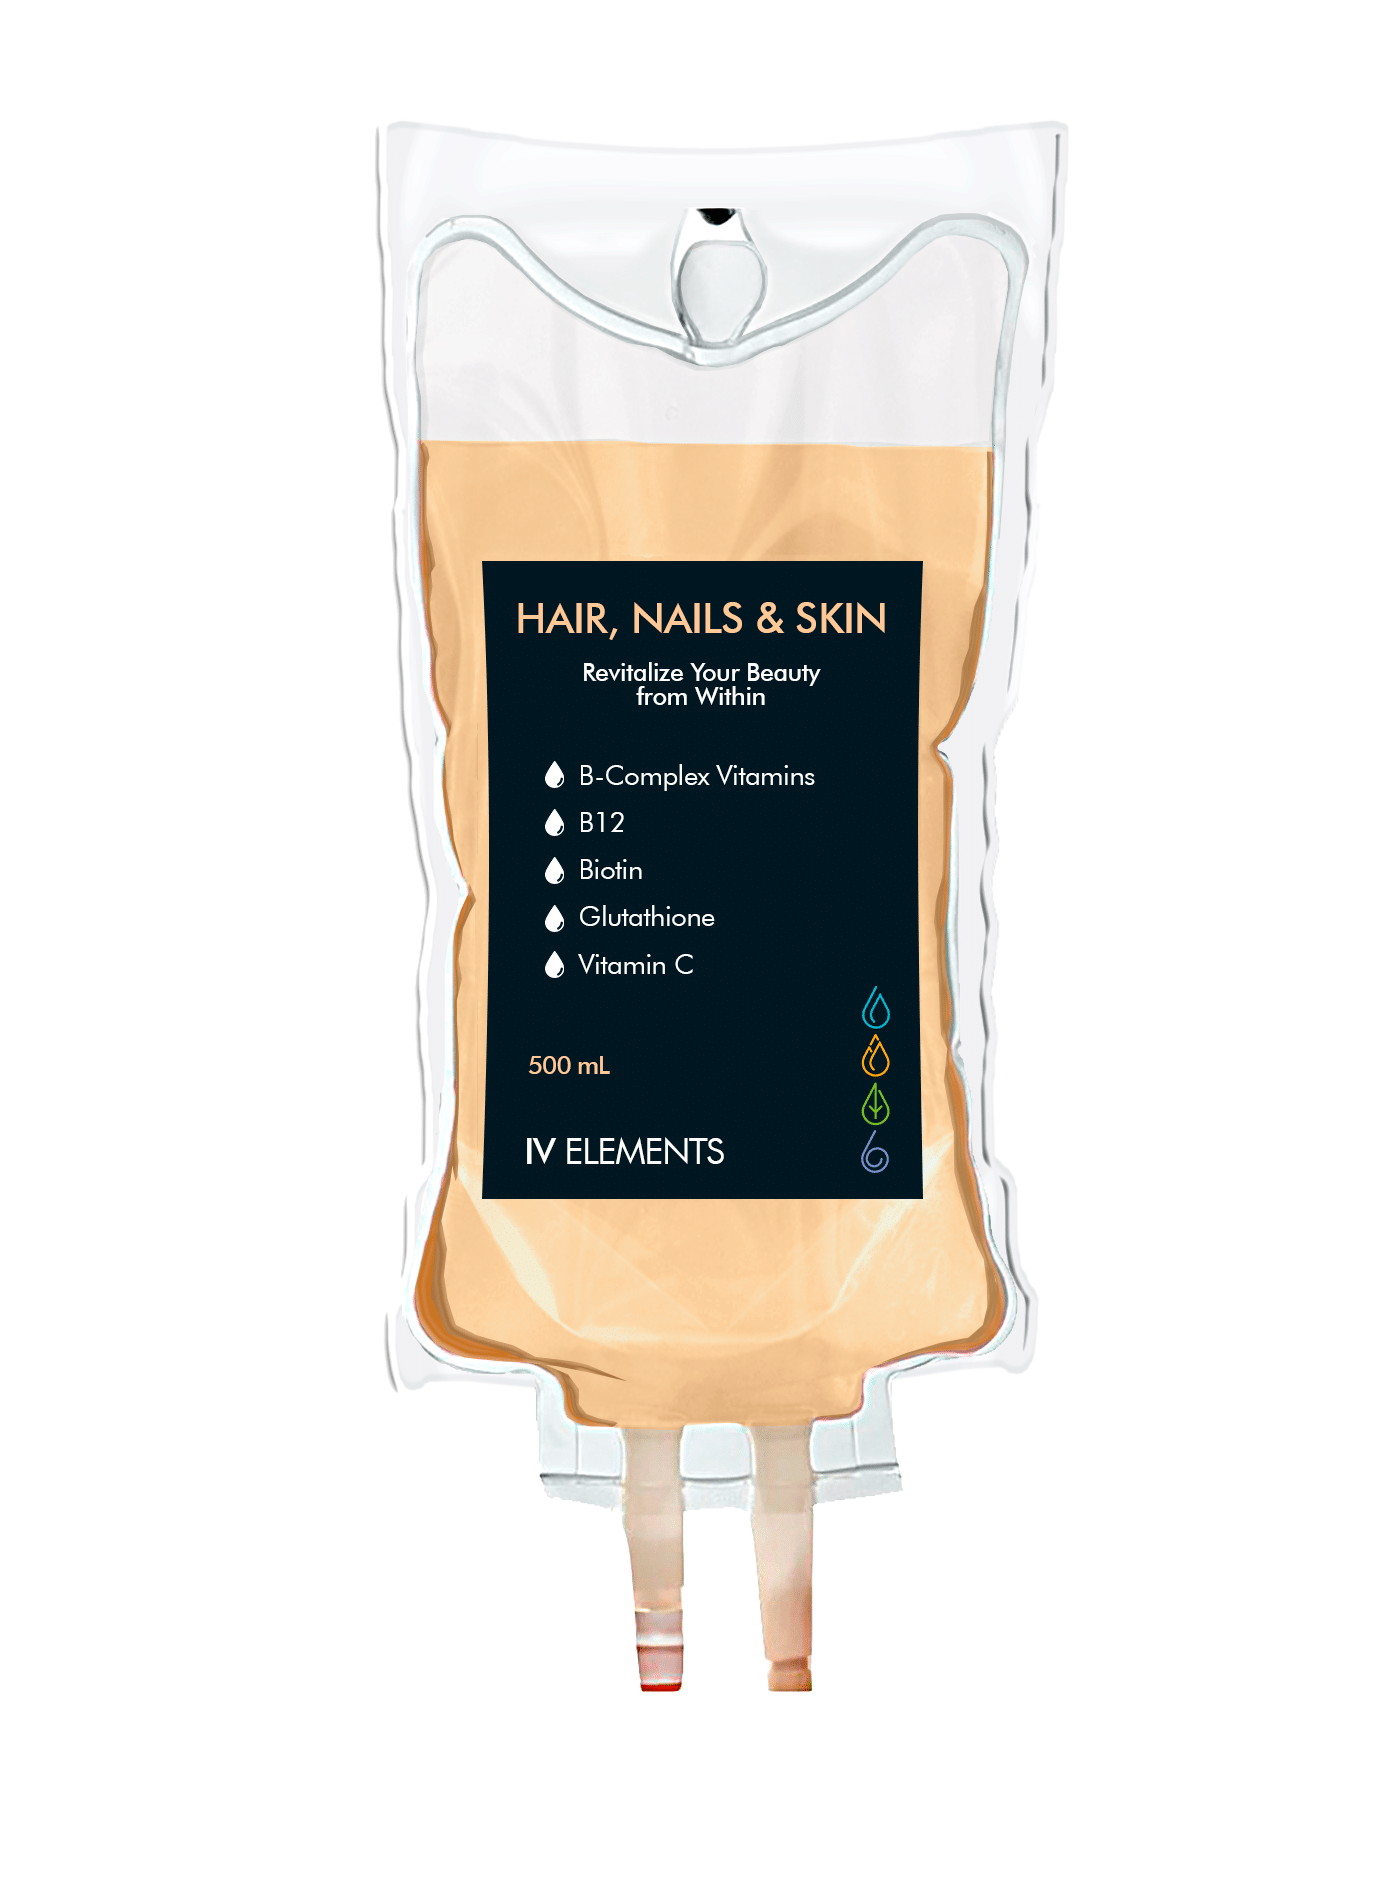 Hair, Nails & Skin IV drip bag from IV Elements: Revitalize your beauty from within